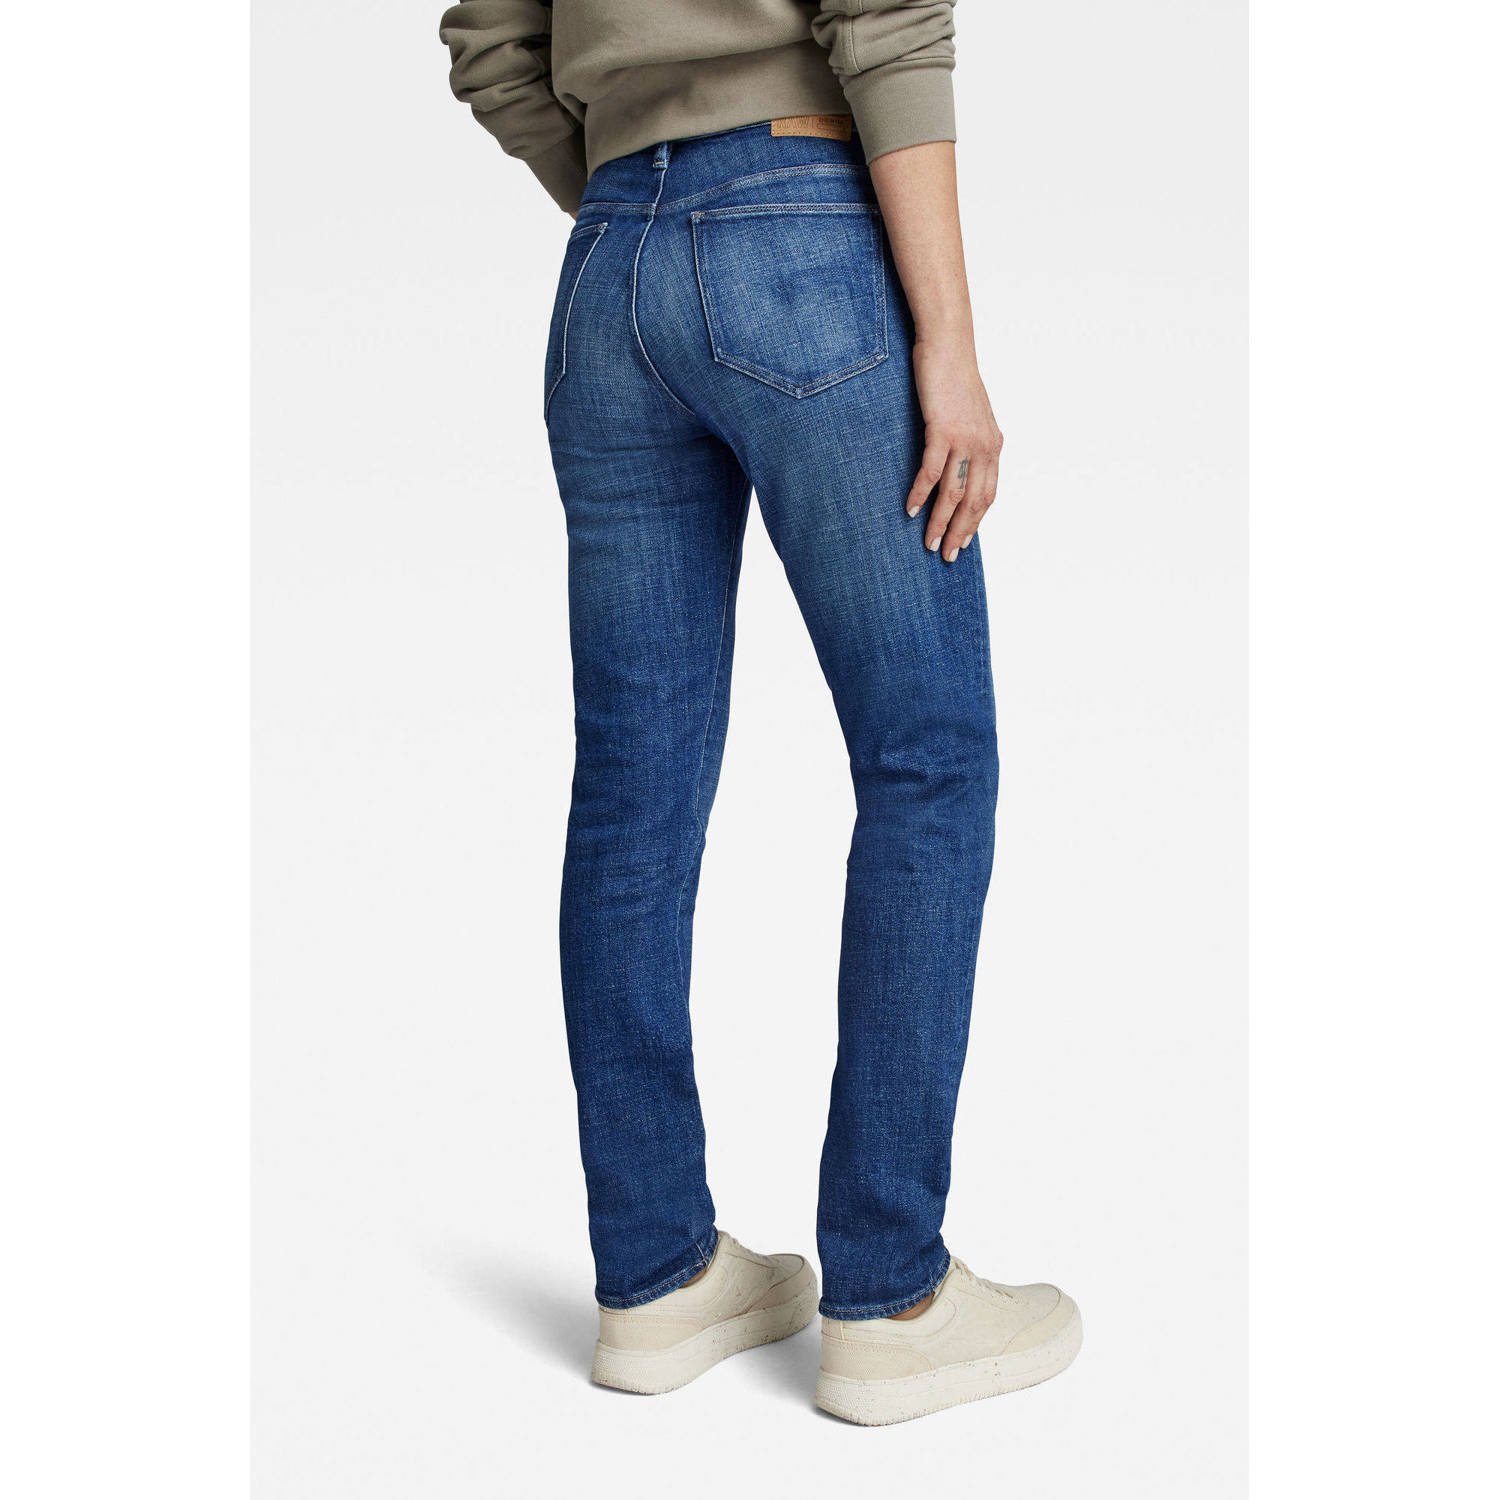 G-Star RAW Ace 2.0 straight jeans faded radiance blue